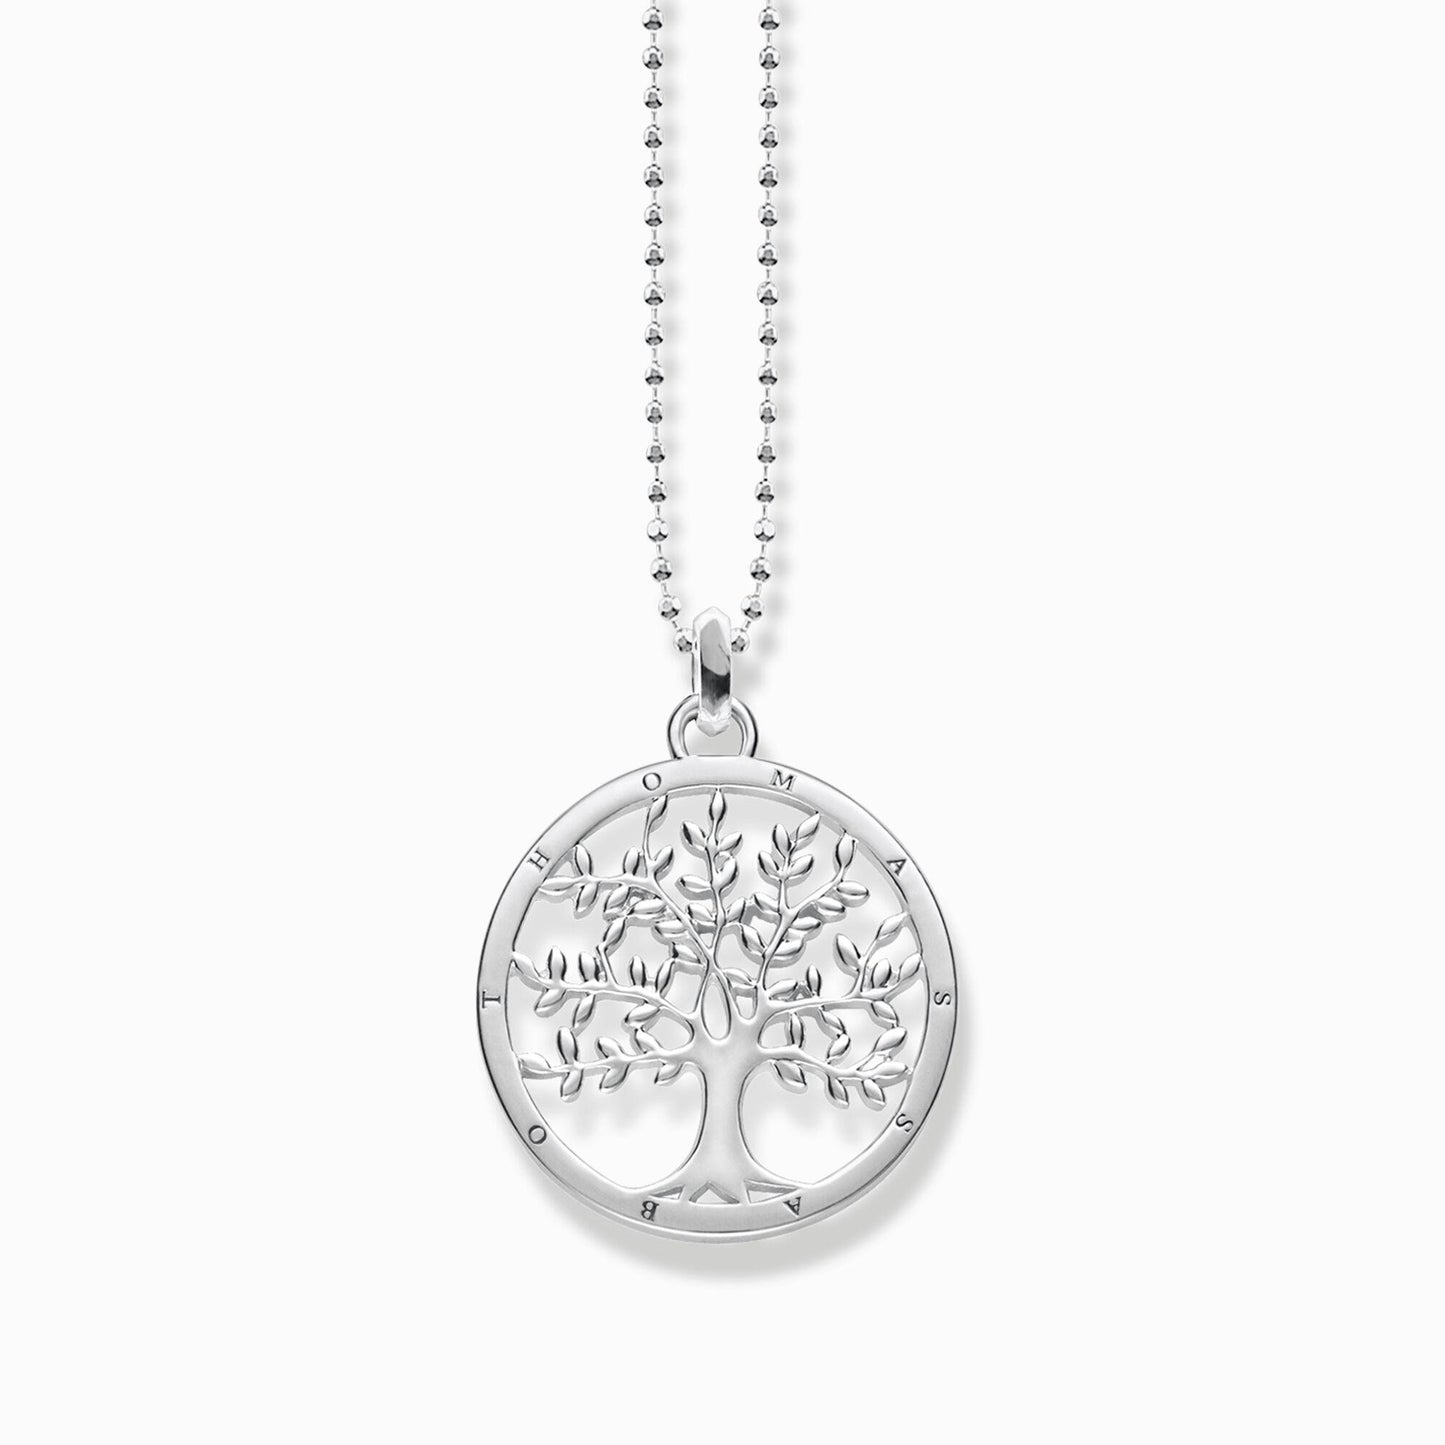 Thomas Sabo Sterling Silver Tree of Life Necklace KE1660 - Judith Hart Jewellers